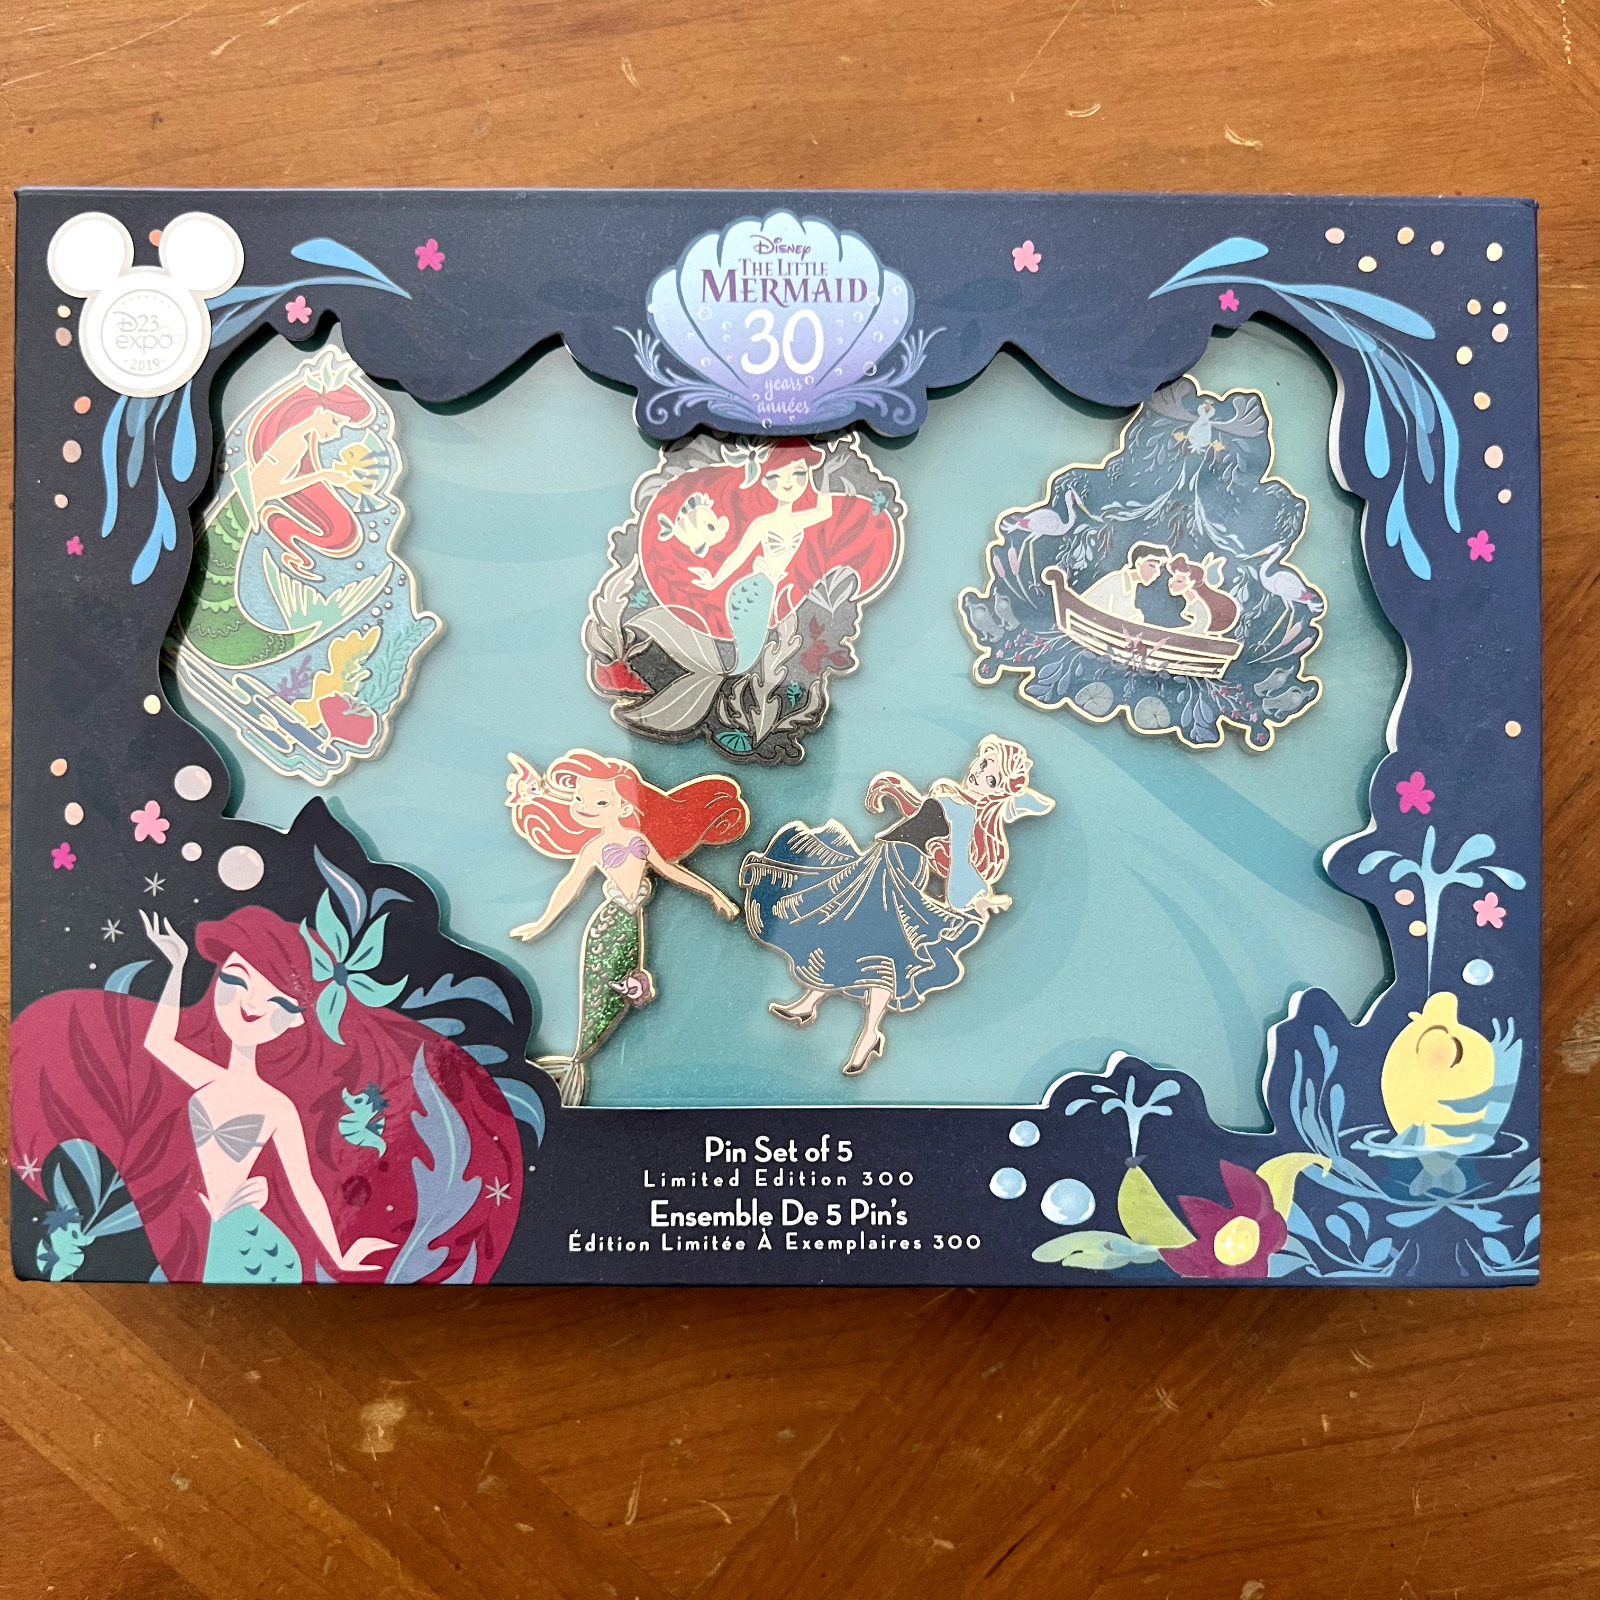 D23 Expo 2019 The Little Mermaid 30th Anniversary Ariel Set of 5 Pins LE 300 New